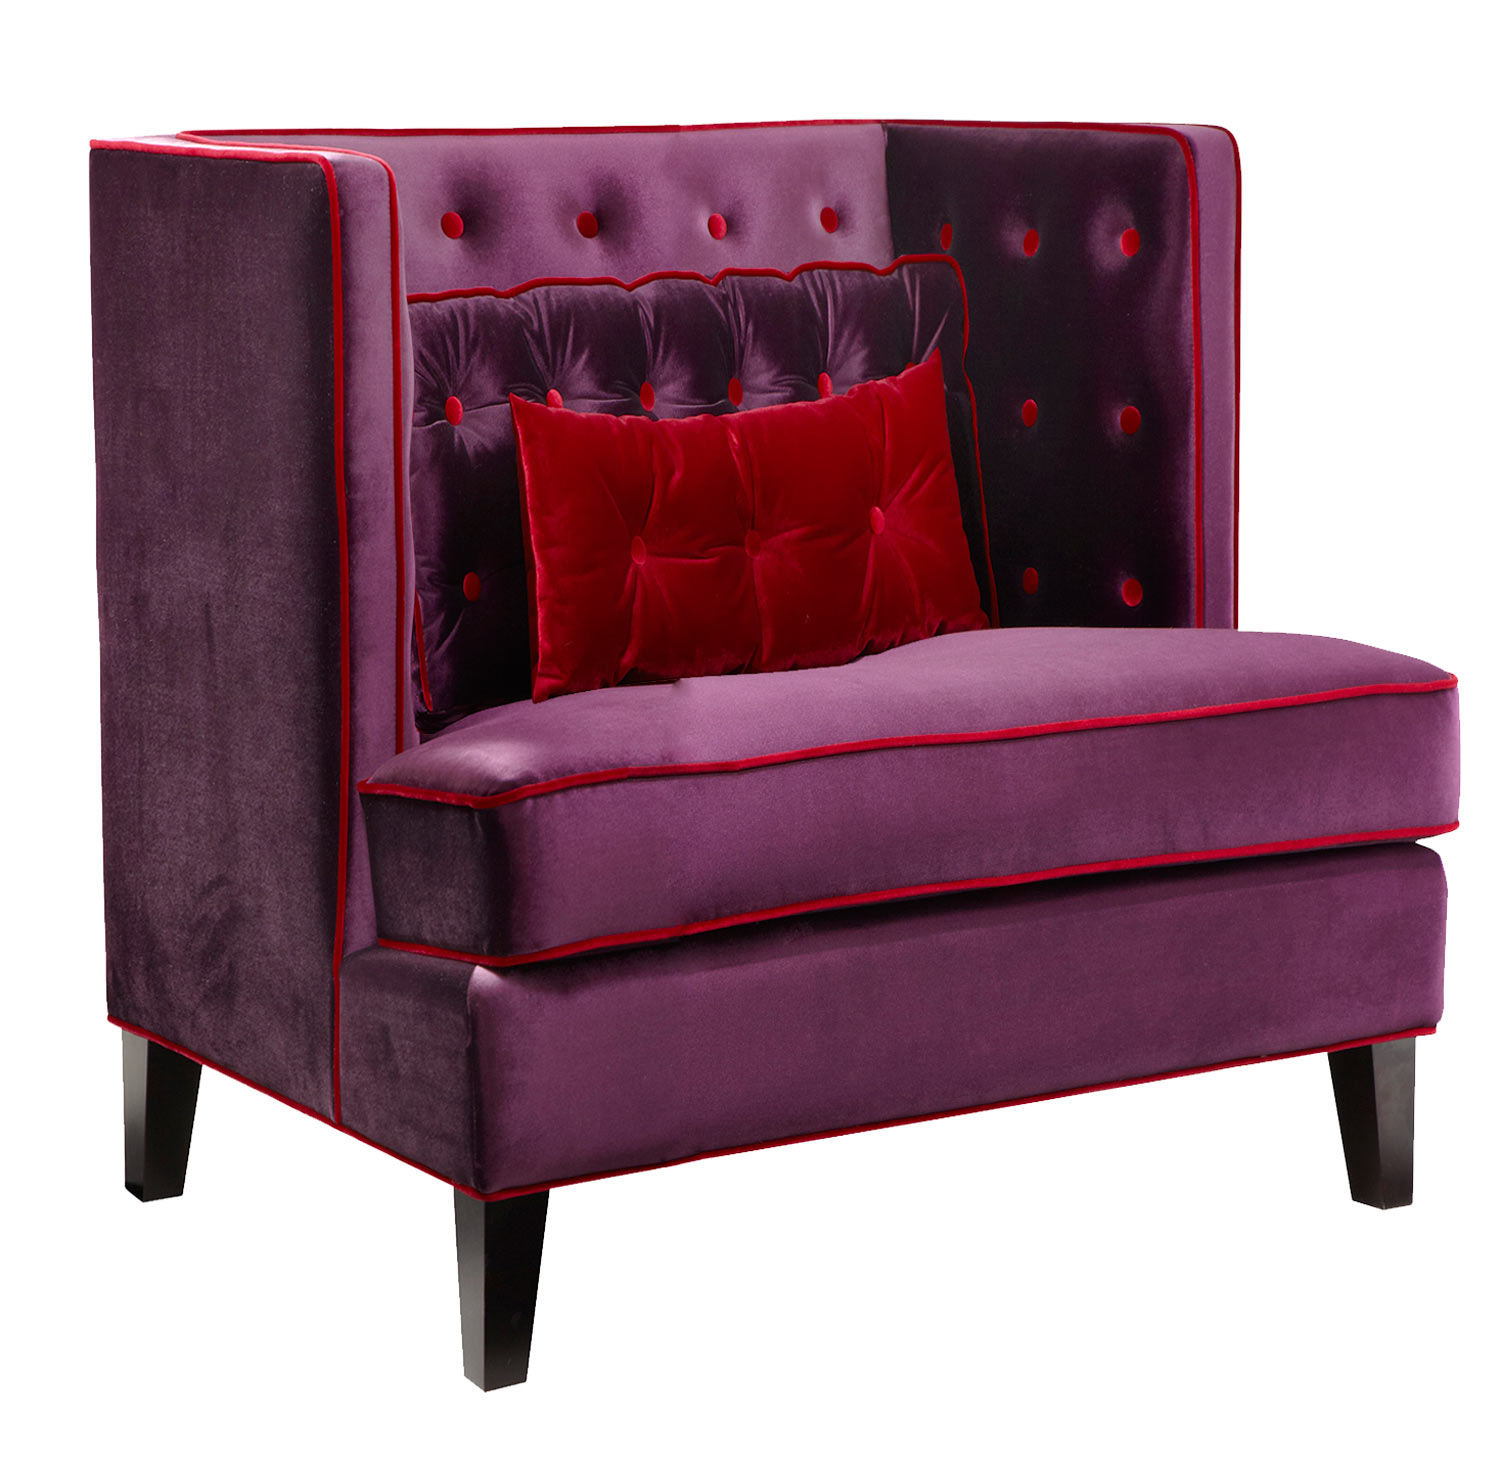 Armen Living Moul-inch Arm Chair -Velvet Purple/Red Piping